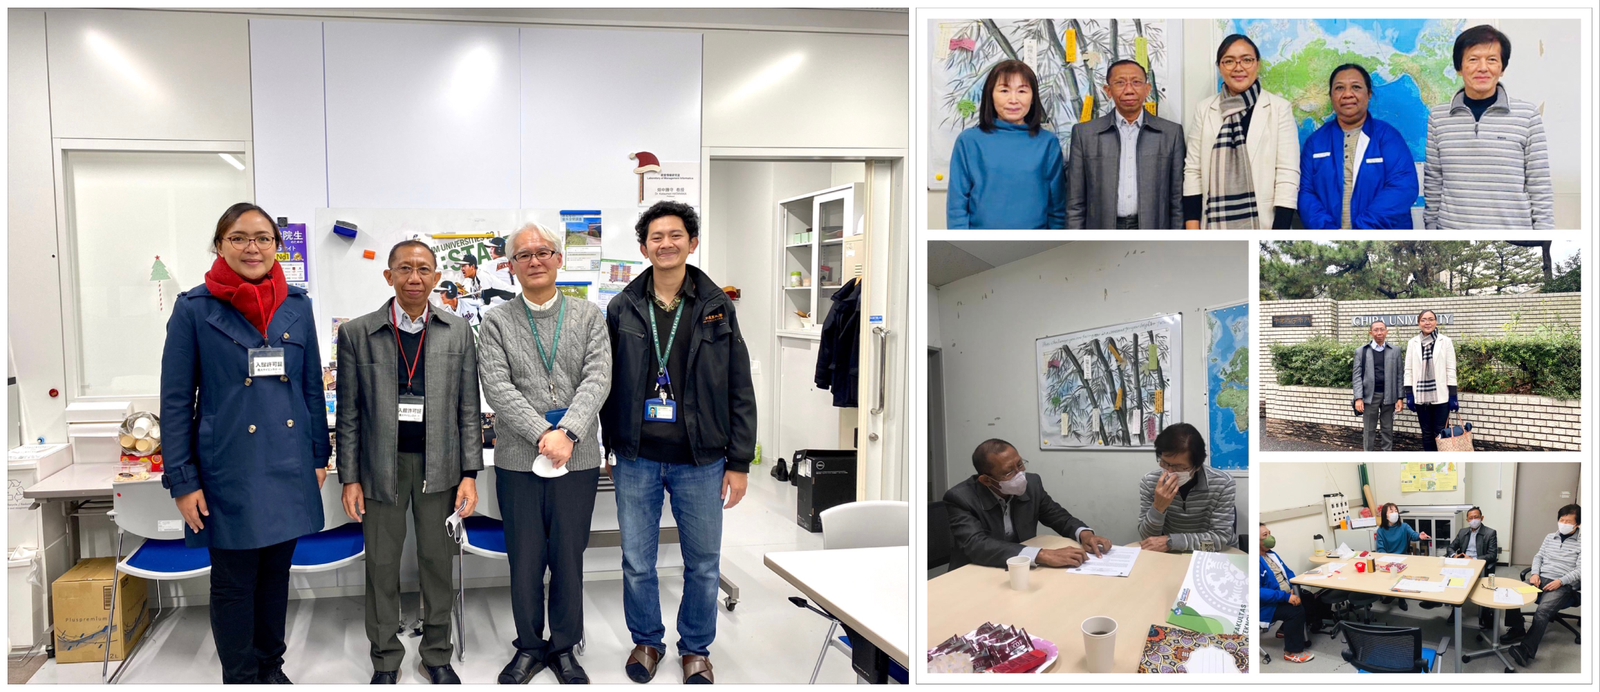 Towards Internationalization, FTP Unud Strengthens Cooperation with Chiba University and Tokyo University of Agriculture Japan